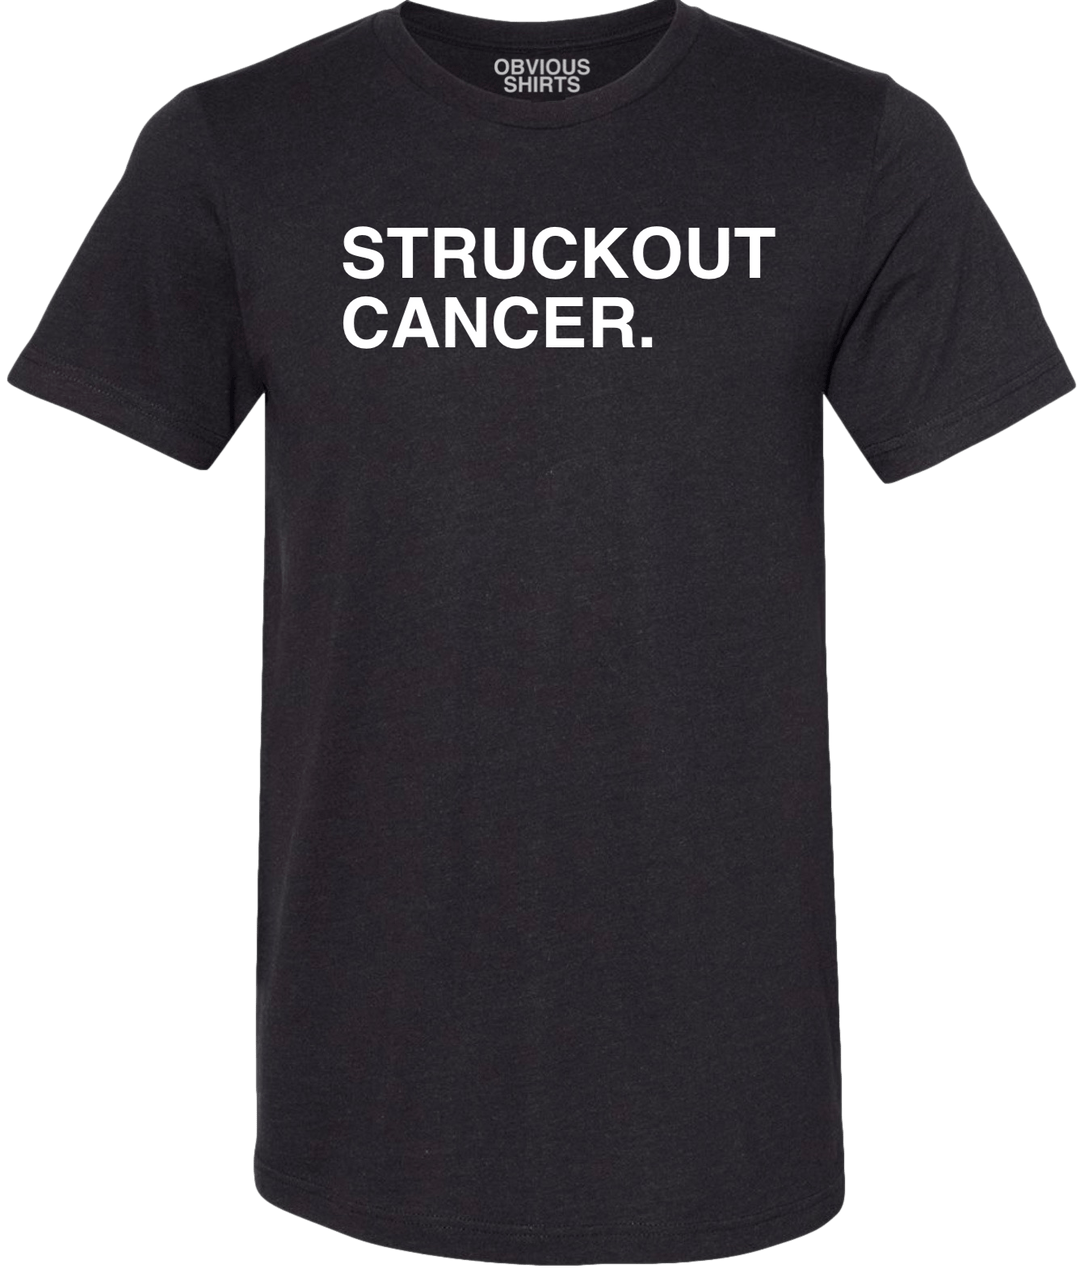 STRUCKOUT CANCER. (100% DONATED) - OBVIOUS SHIRTS